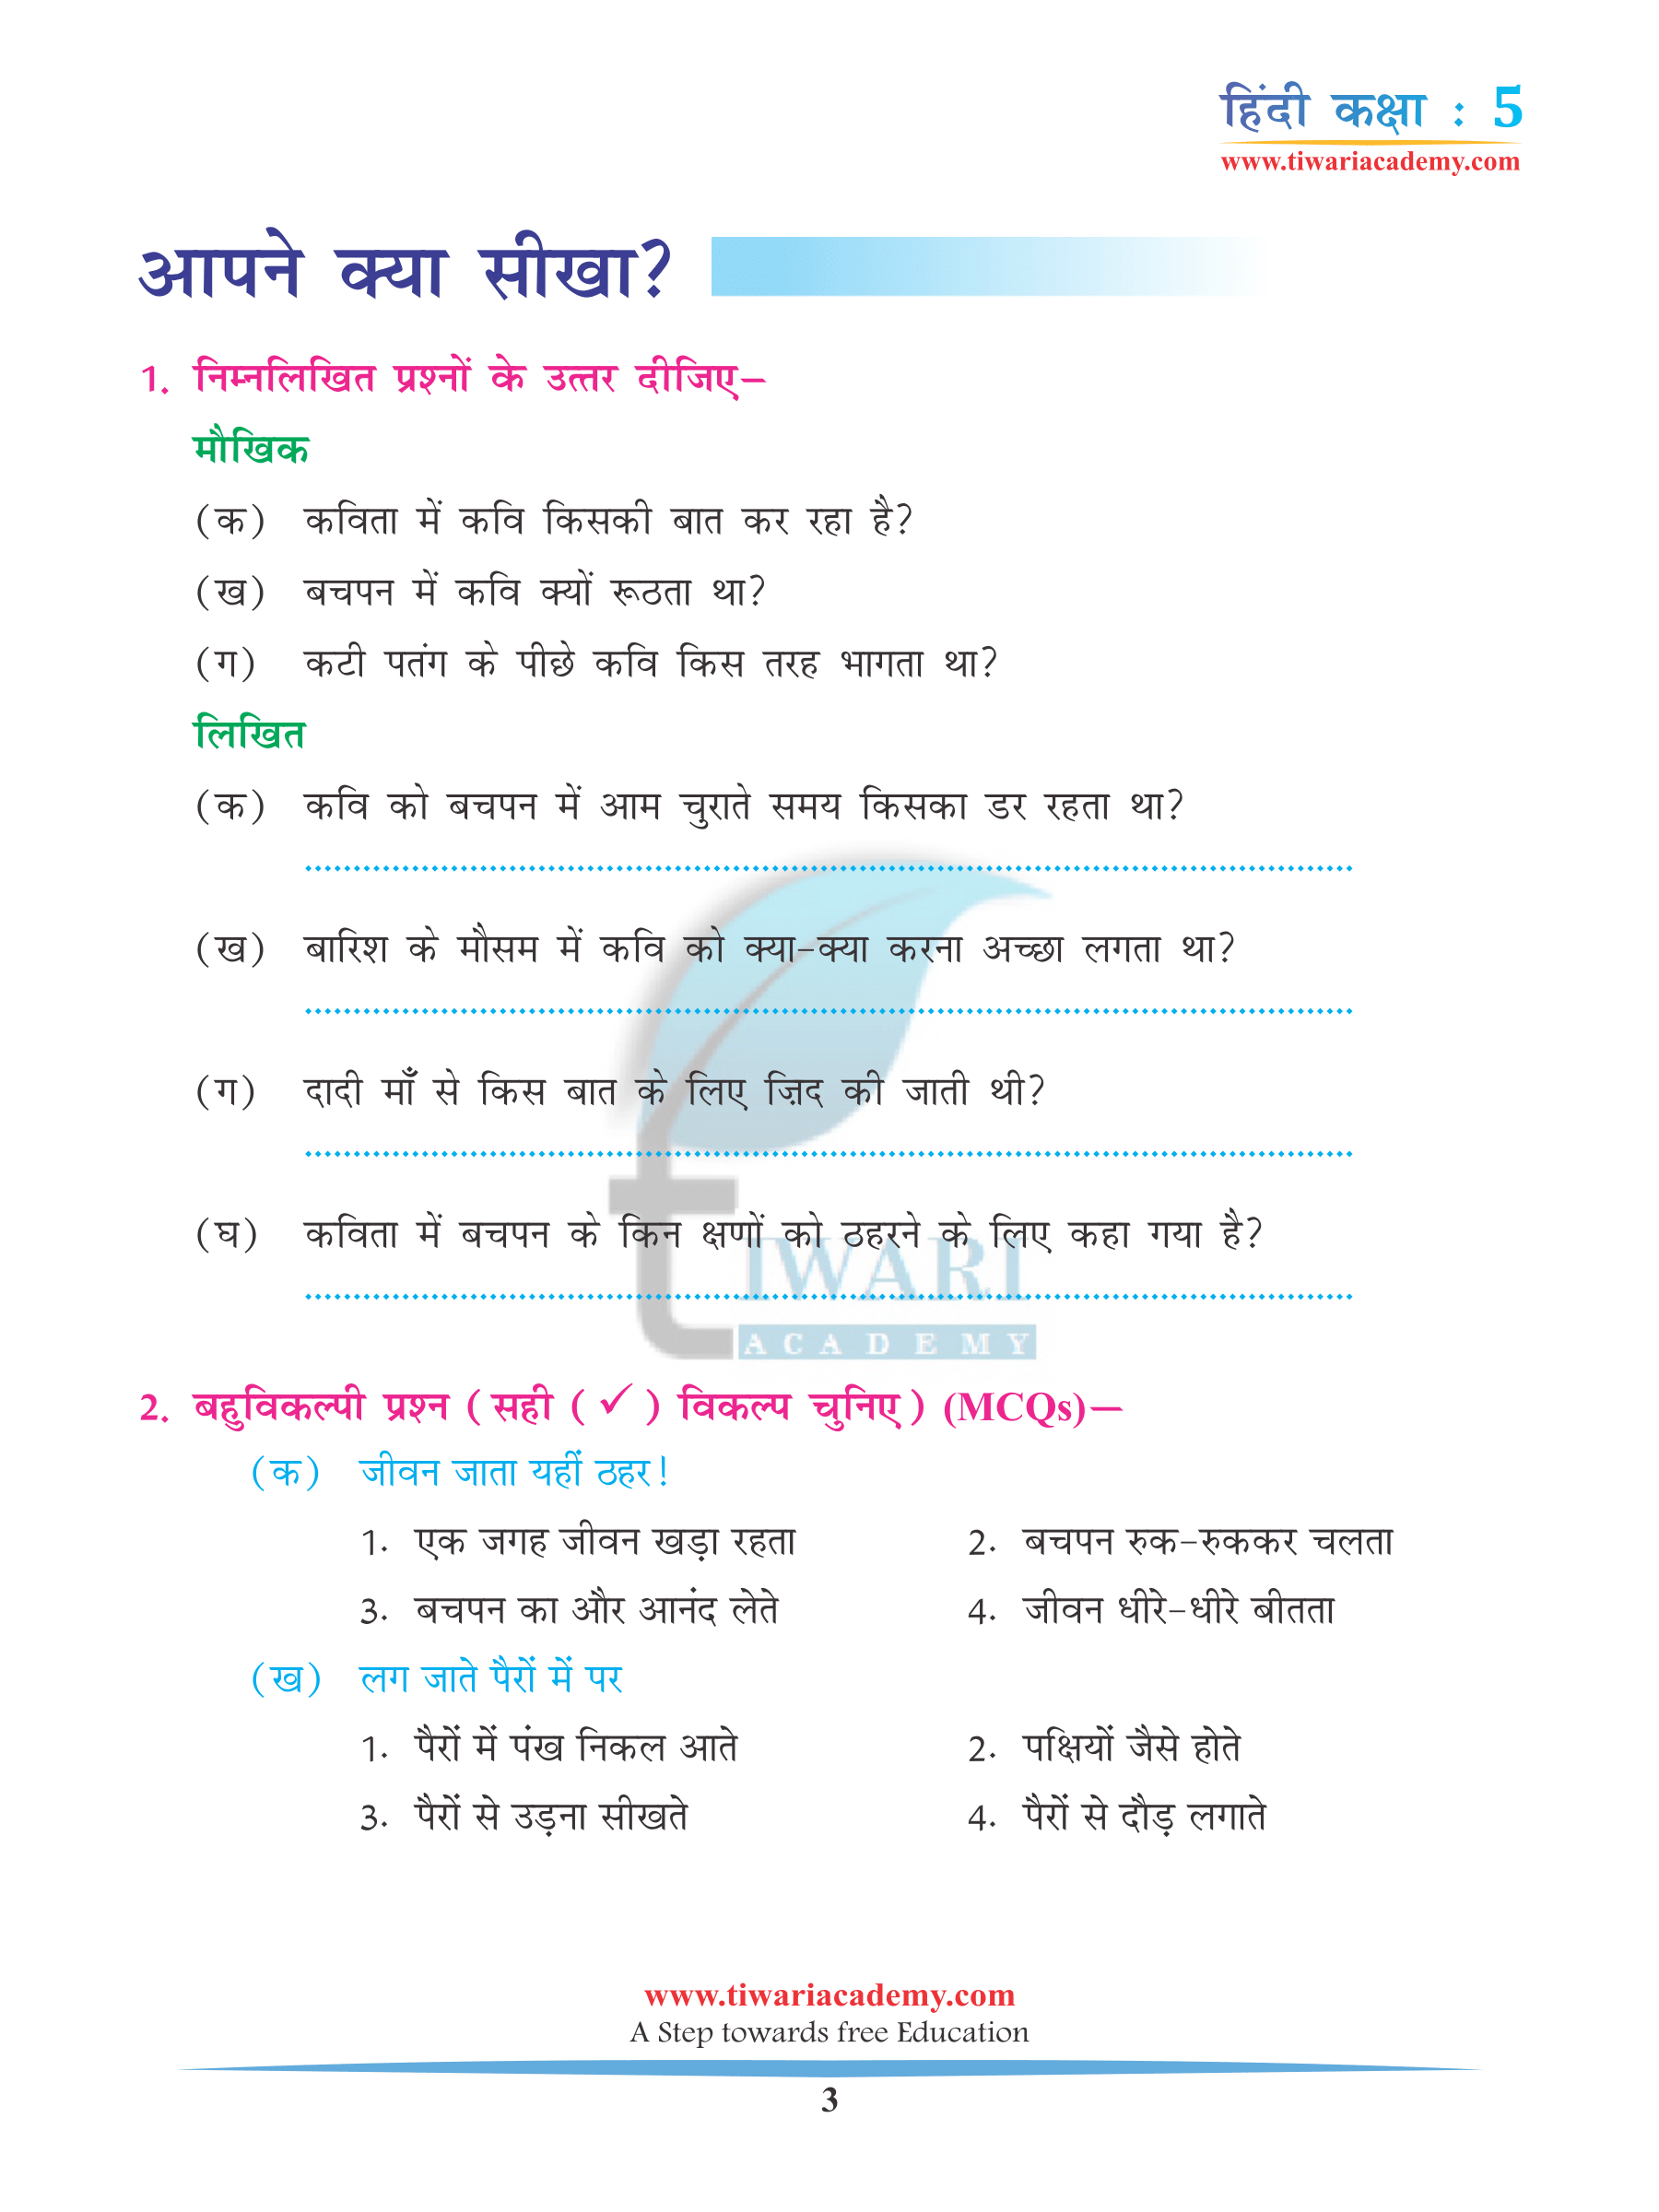 CBSE Class 5 Hindi Chapter 5 Question Answers